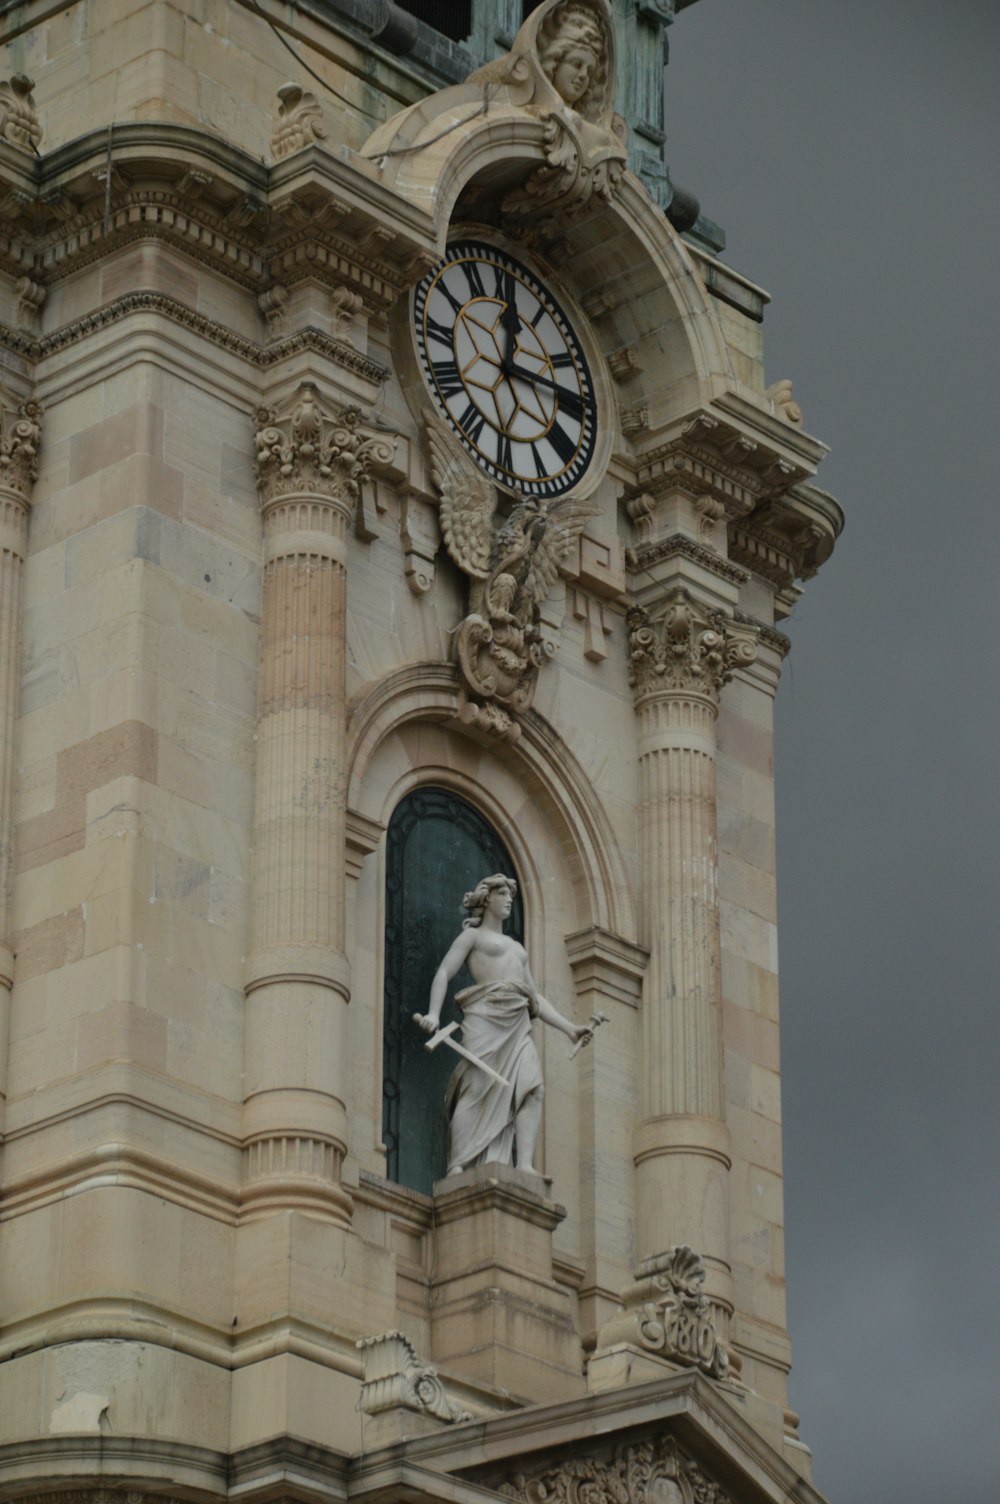 a tall clock tower with a statue on the top of it